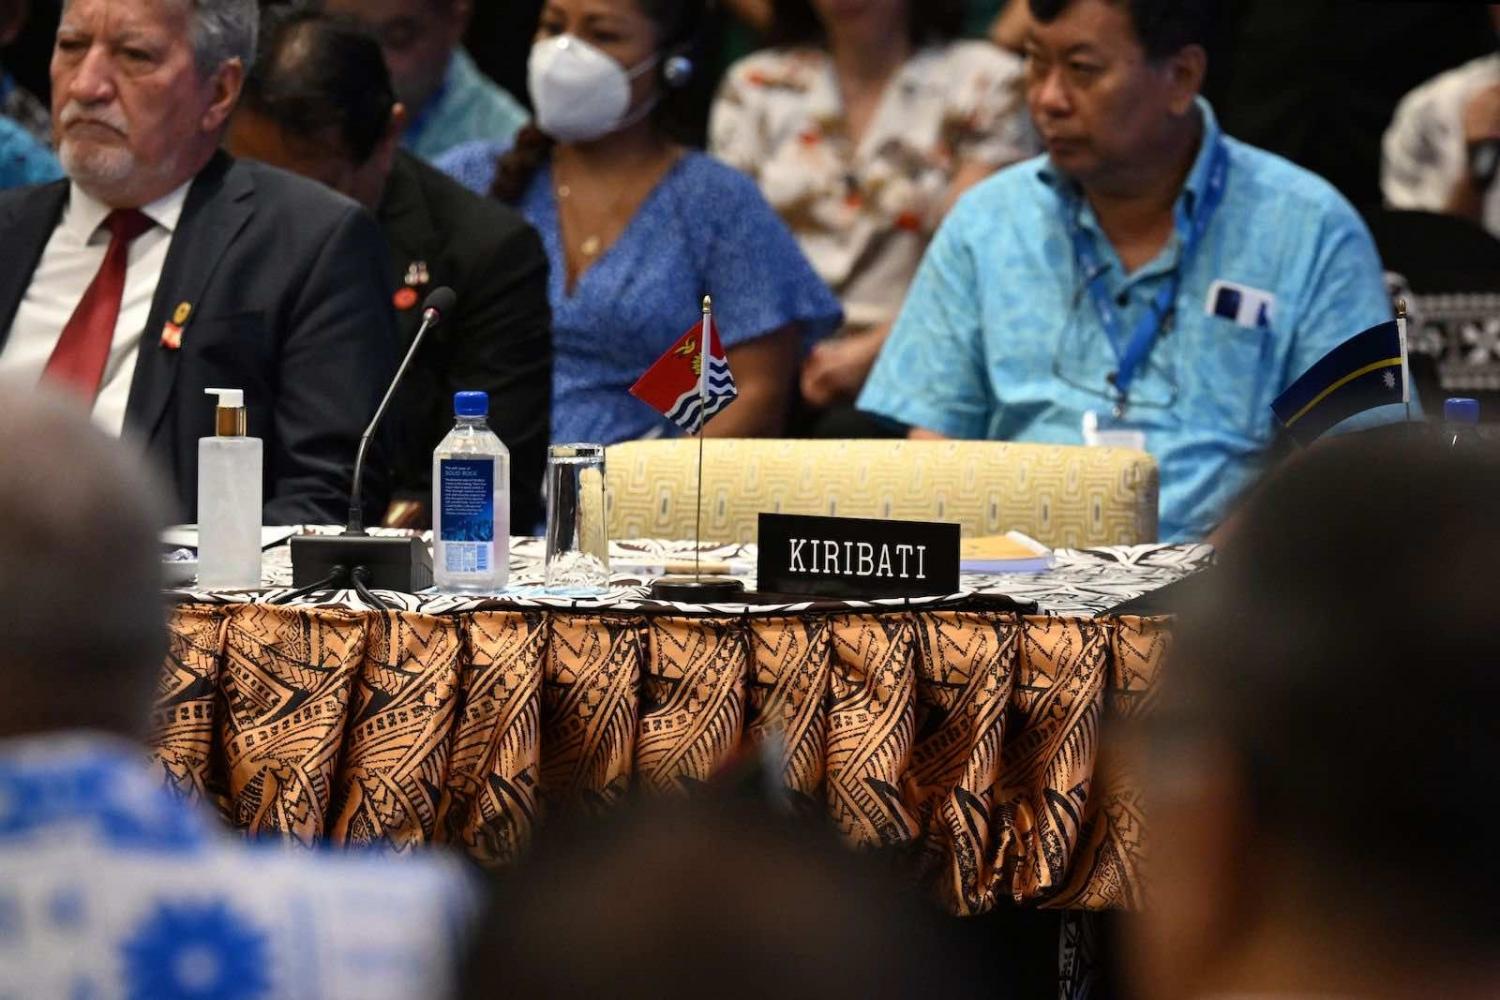 Kiribati’s seat sits empty as Pacific Island leaders listen to the opening remarks of Pacific Islands Forum in Suva on 12 July (William West/AFP via Getty Images)